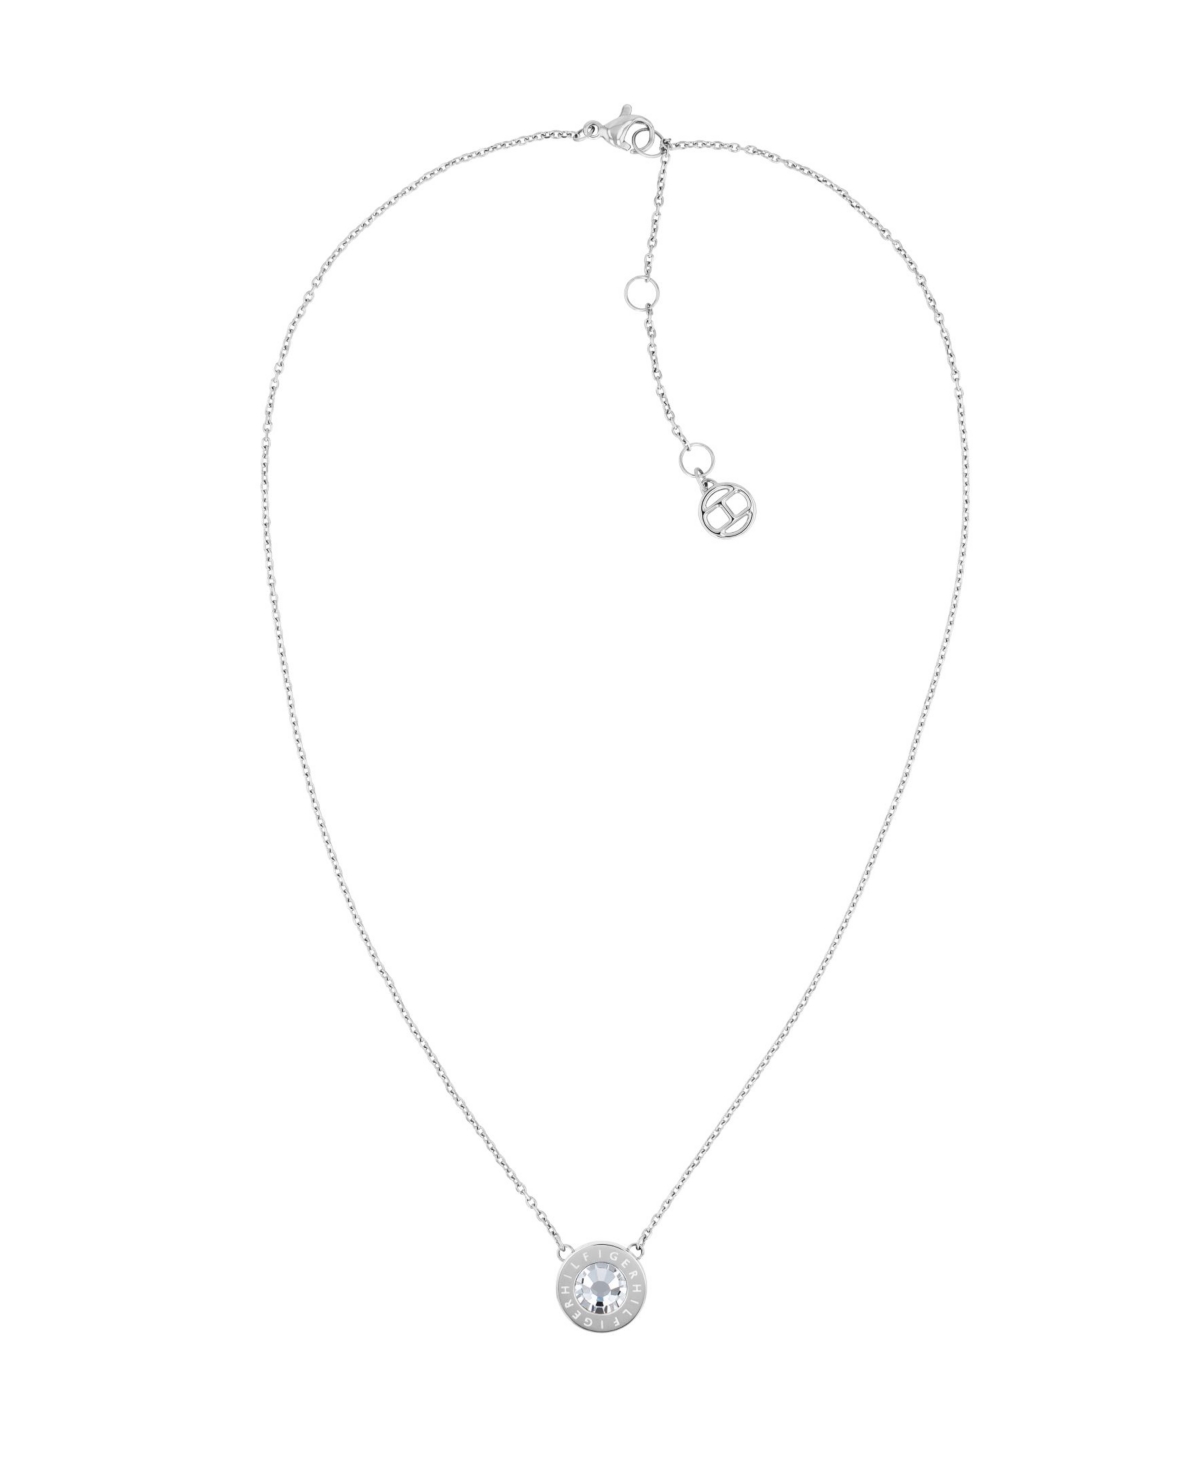 Women's Silver-Tone Stainless Steel Stone Necklace - Silver-tone